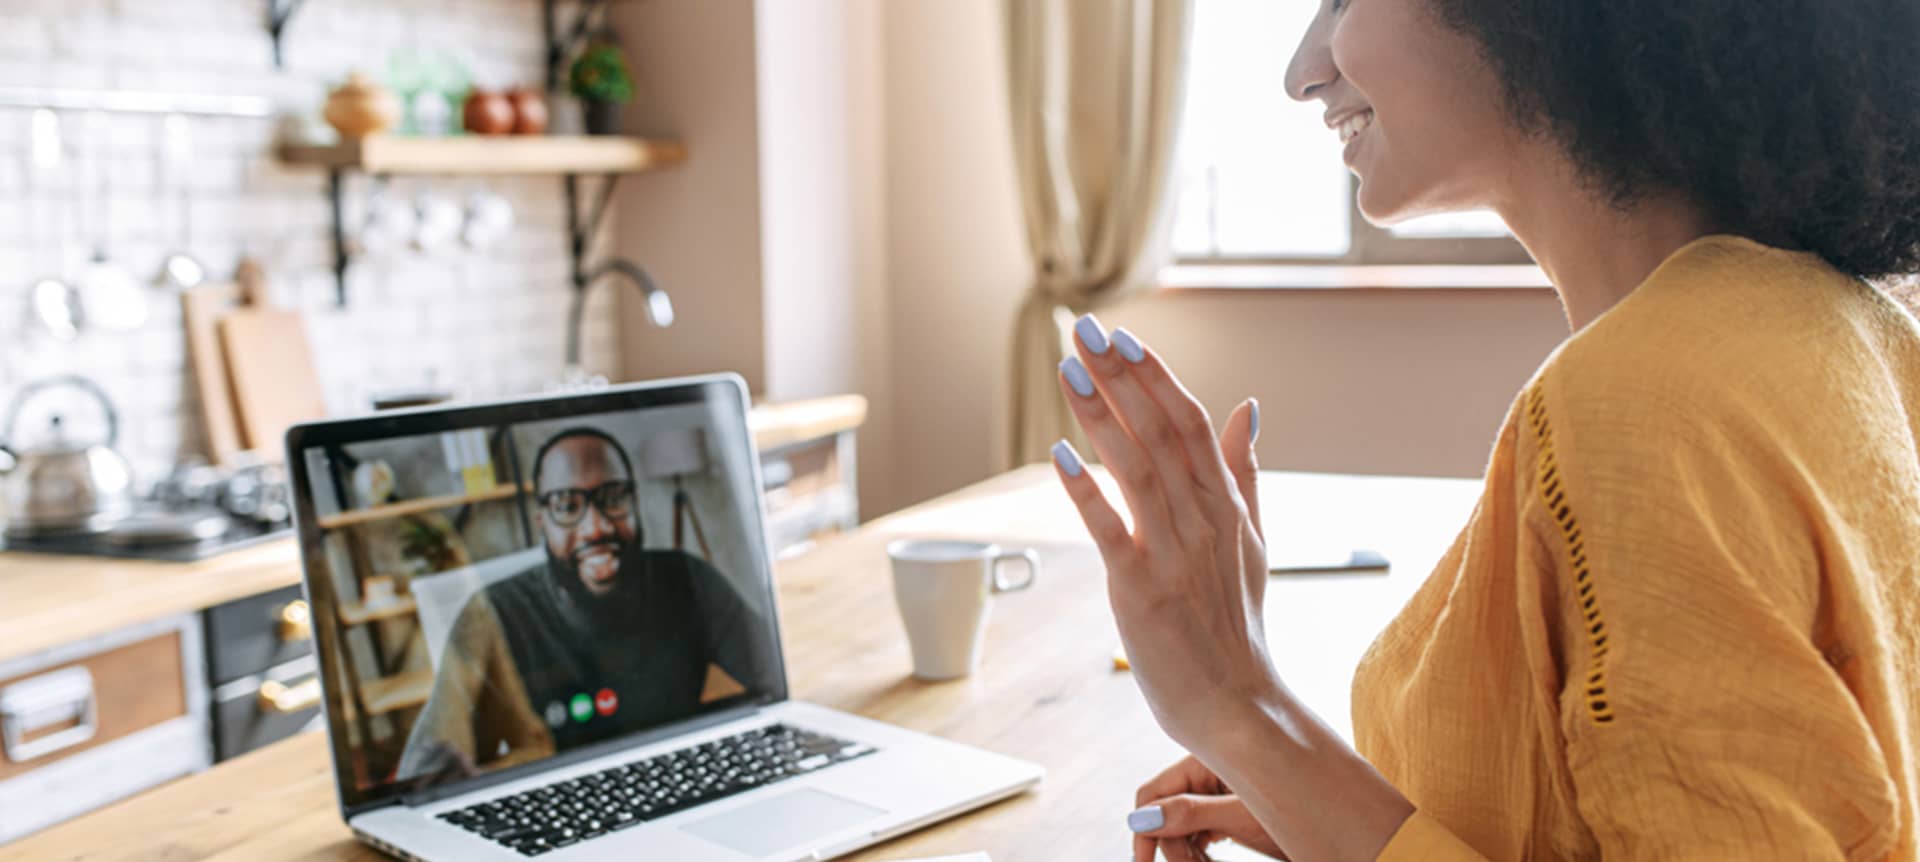 Interactions between recruiter and candidate via video interviewing software